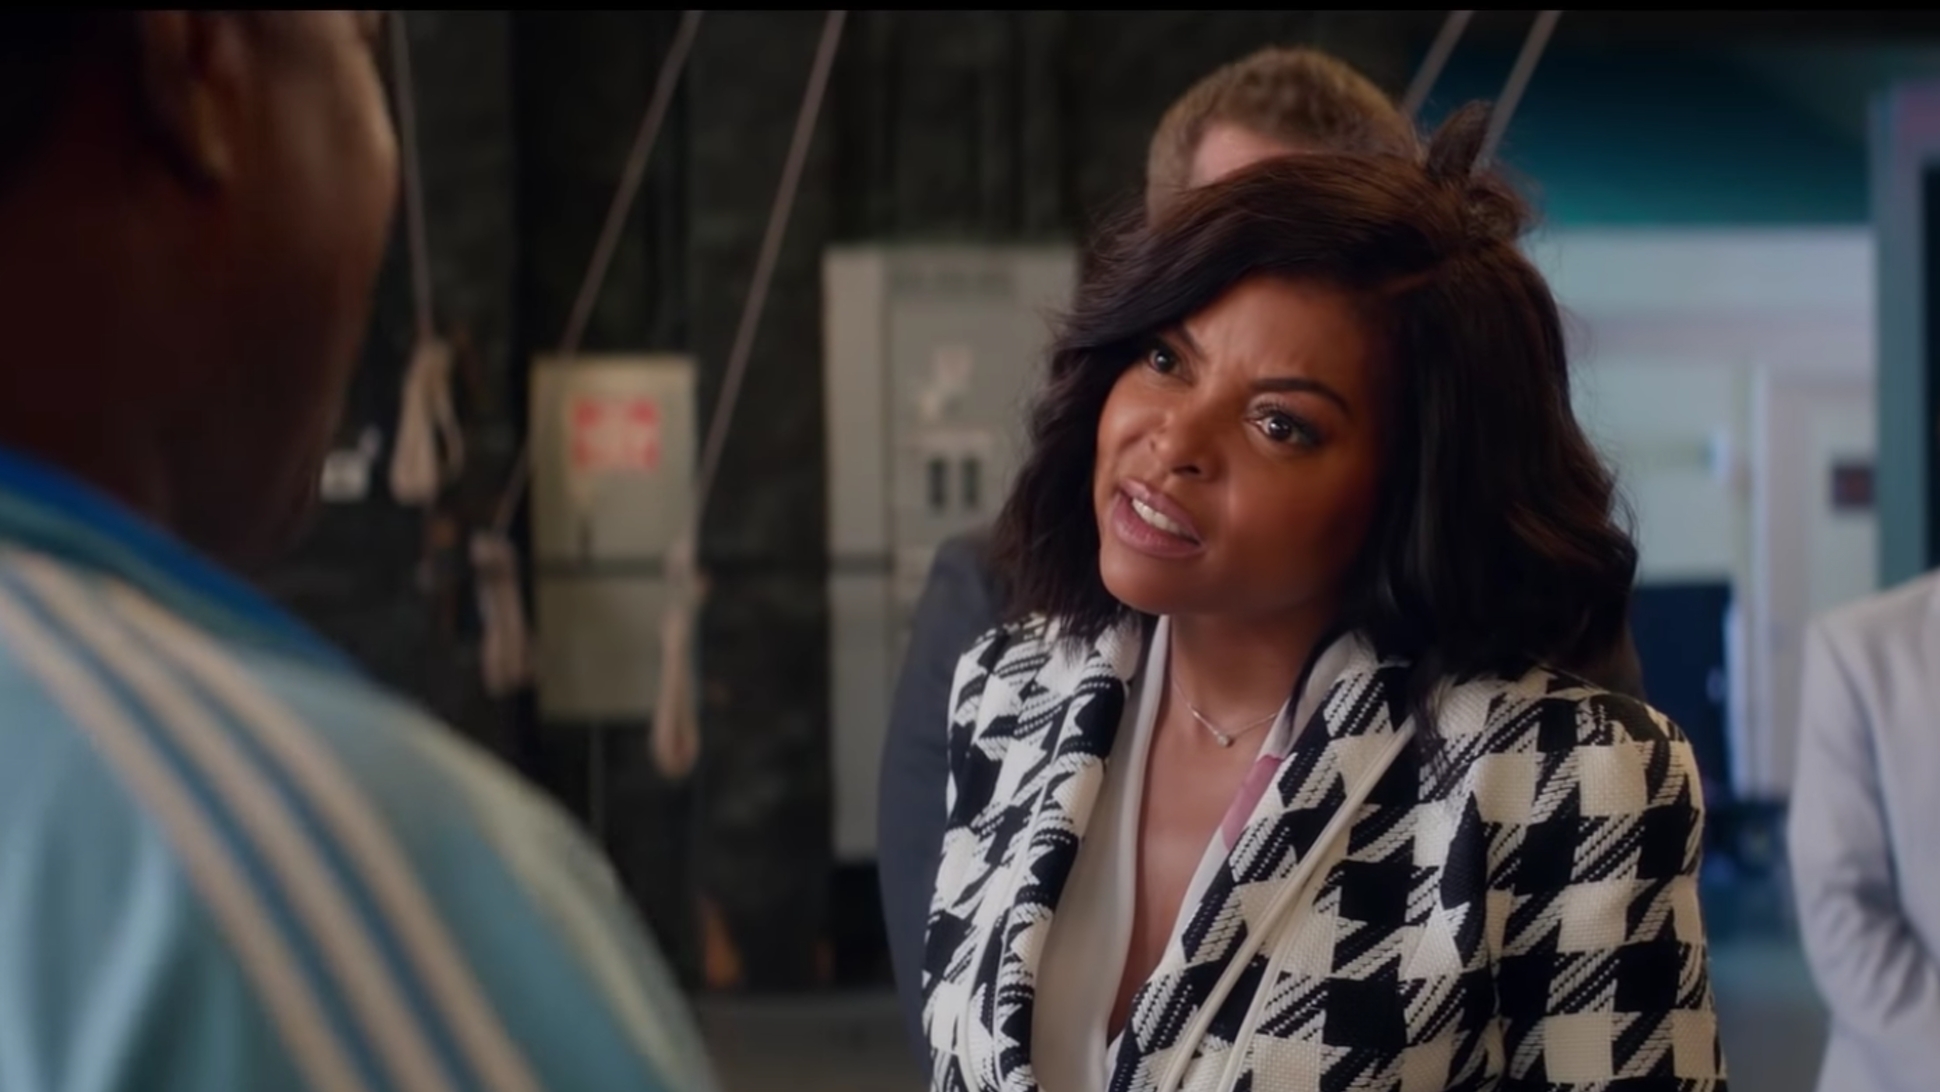 Watch Taraji P. Henson Effectively Deal With A Man’s Wandering Eye In ‘What Men Want’